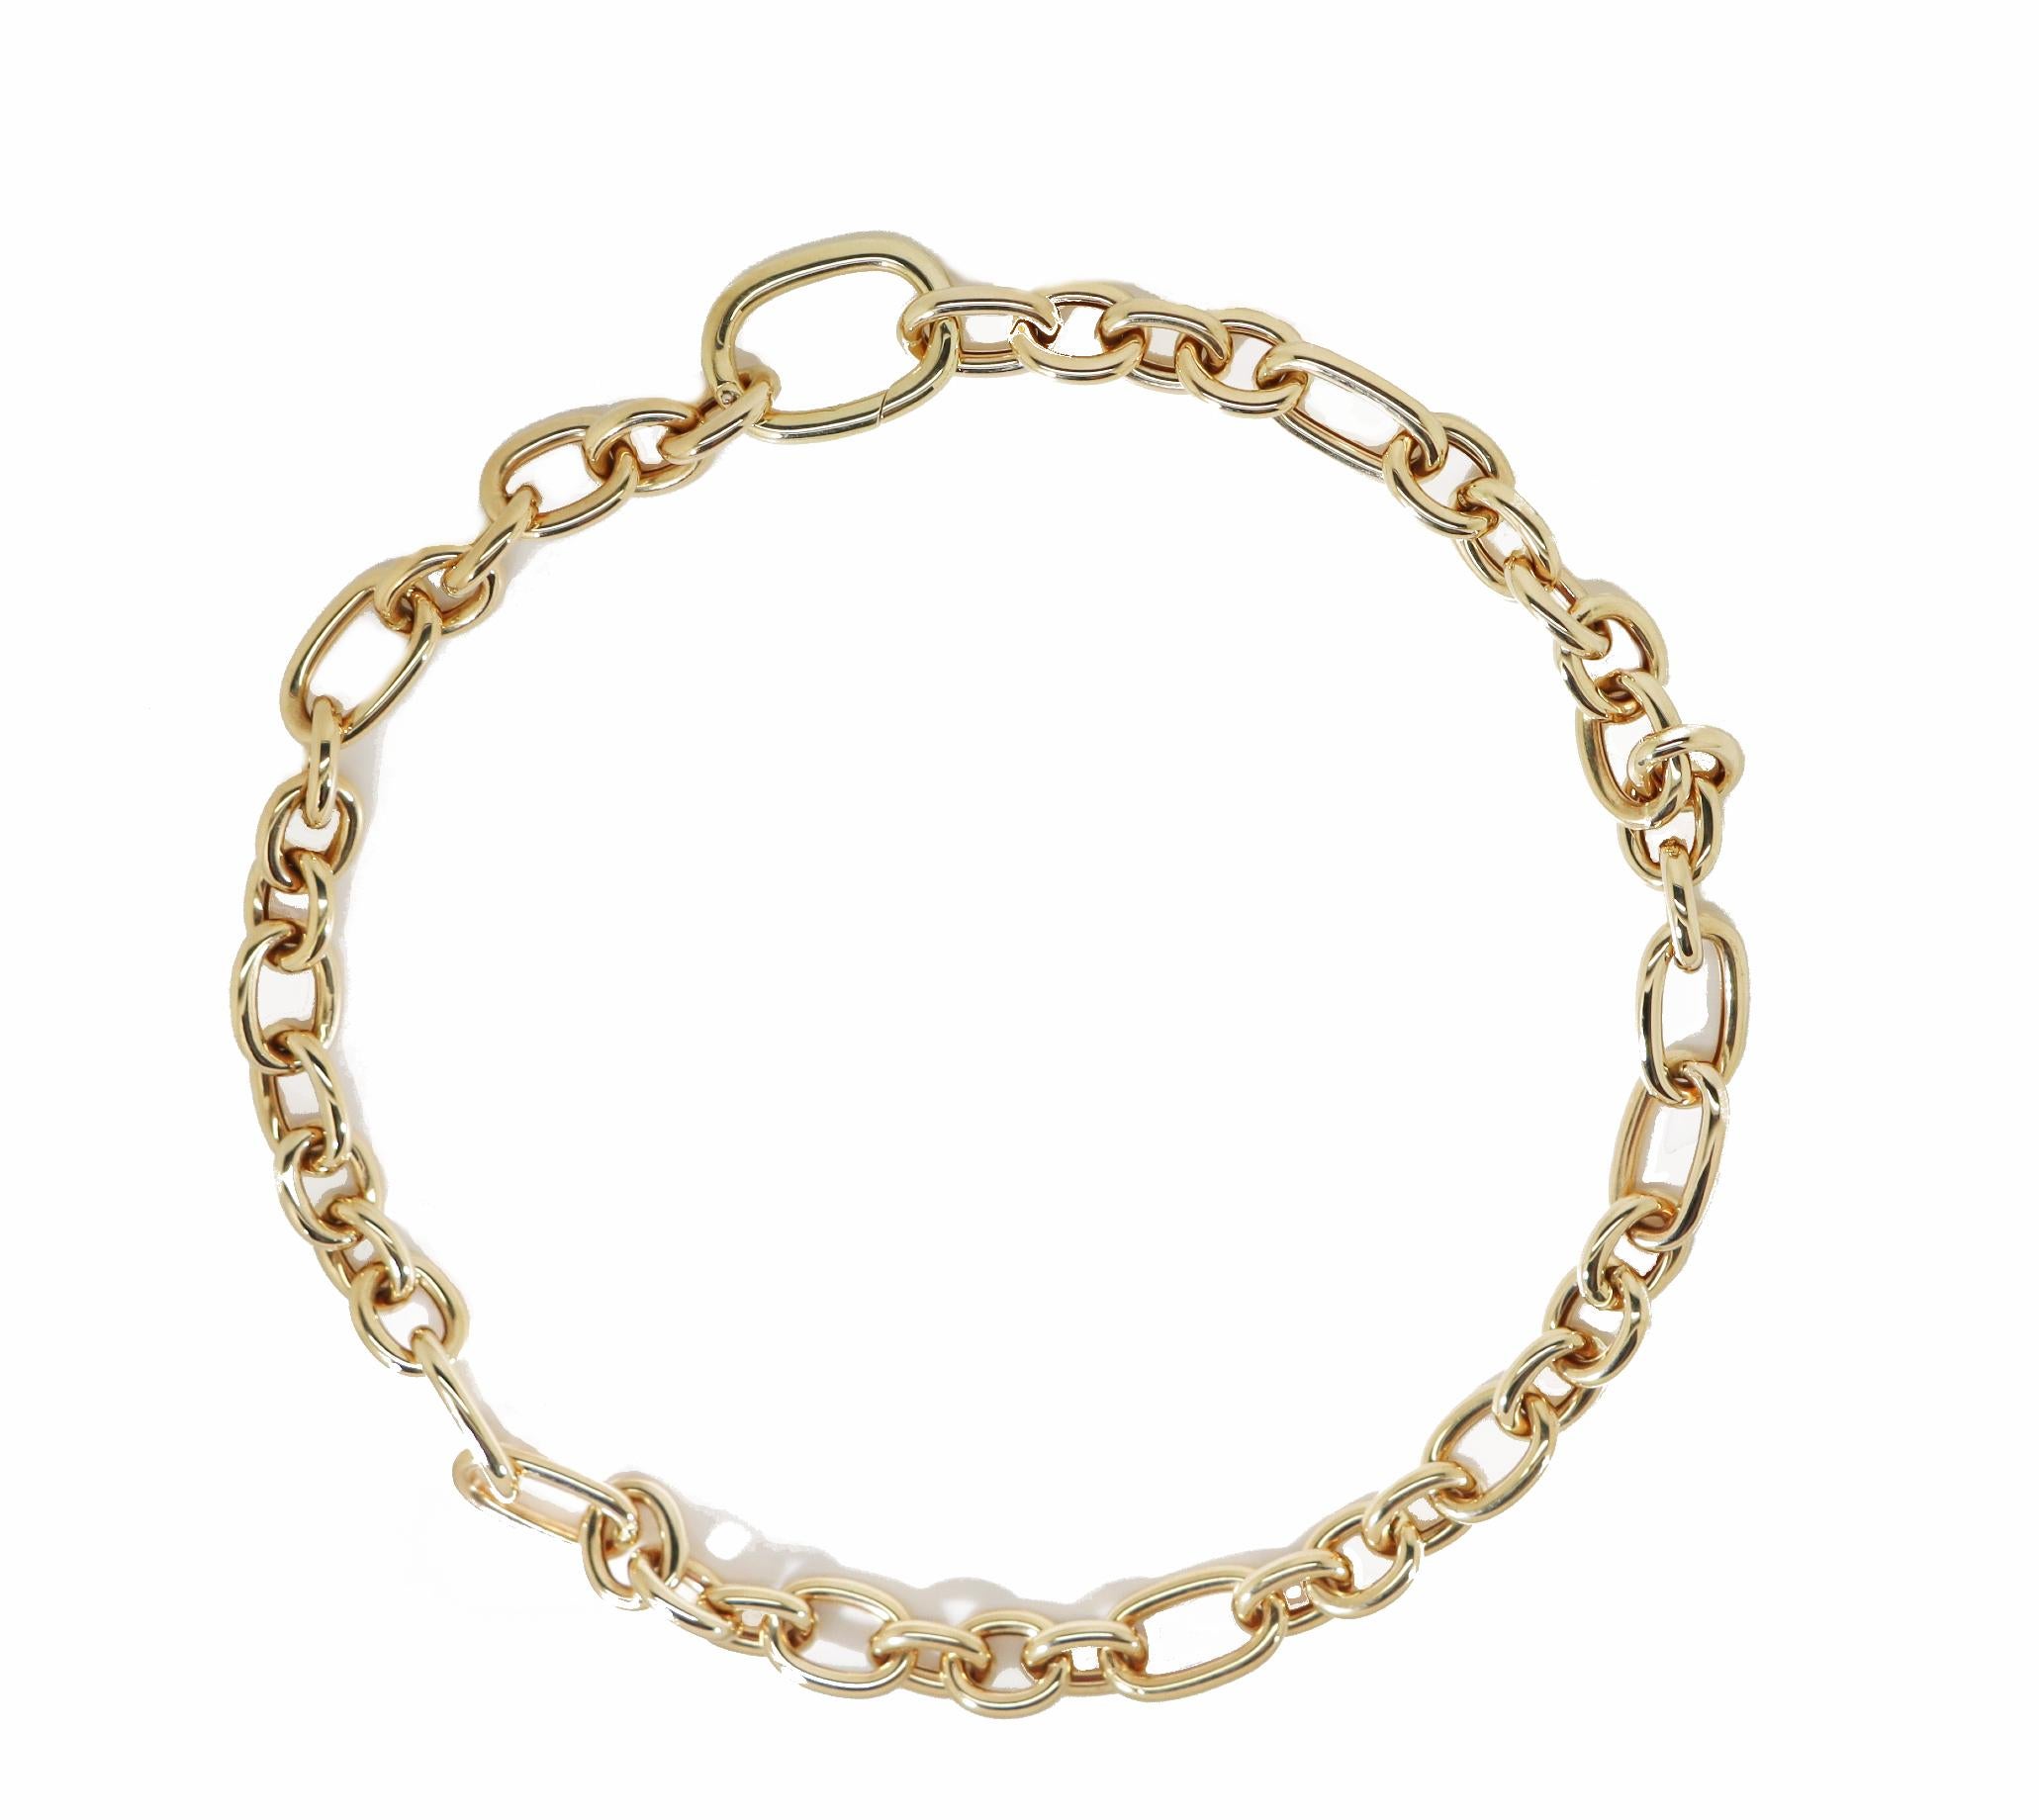 Maviada Gold Link Chain Necklace in 18k gold For Sale 1